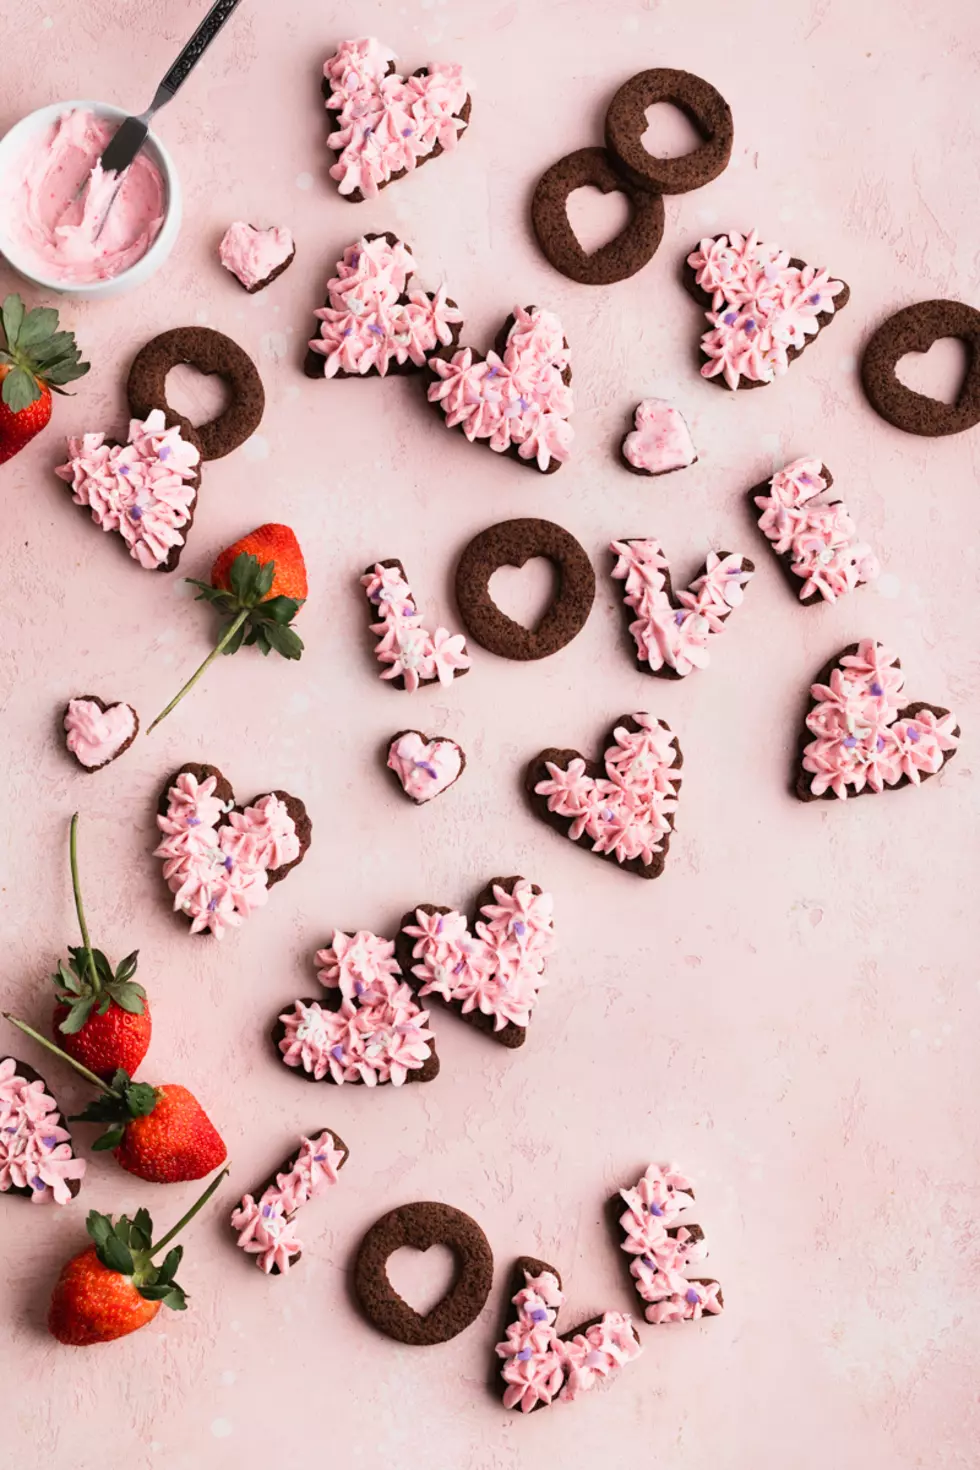 Thinking of Valentine’s Day Gift Ideas? Decorate These Vegan Chocolate Sugar Cookies